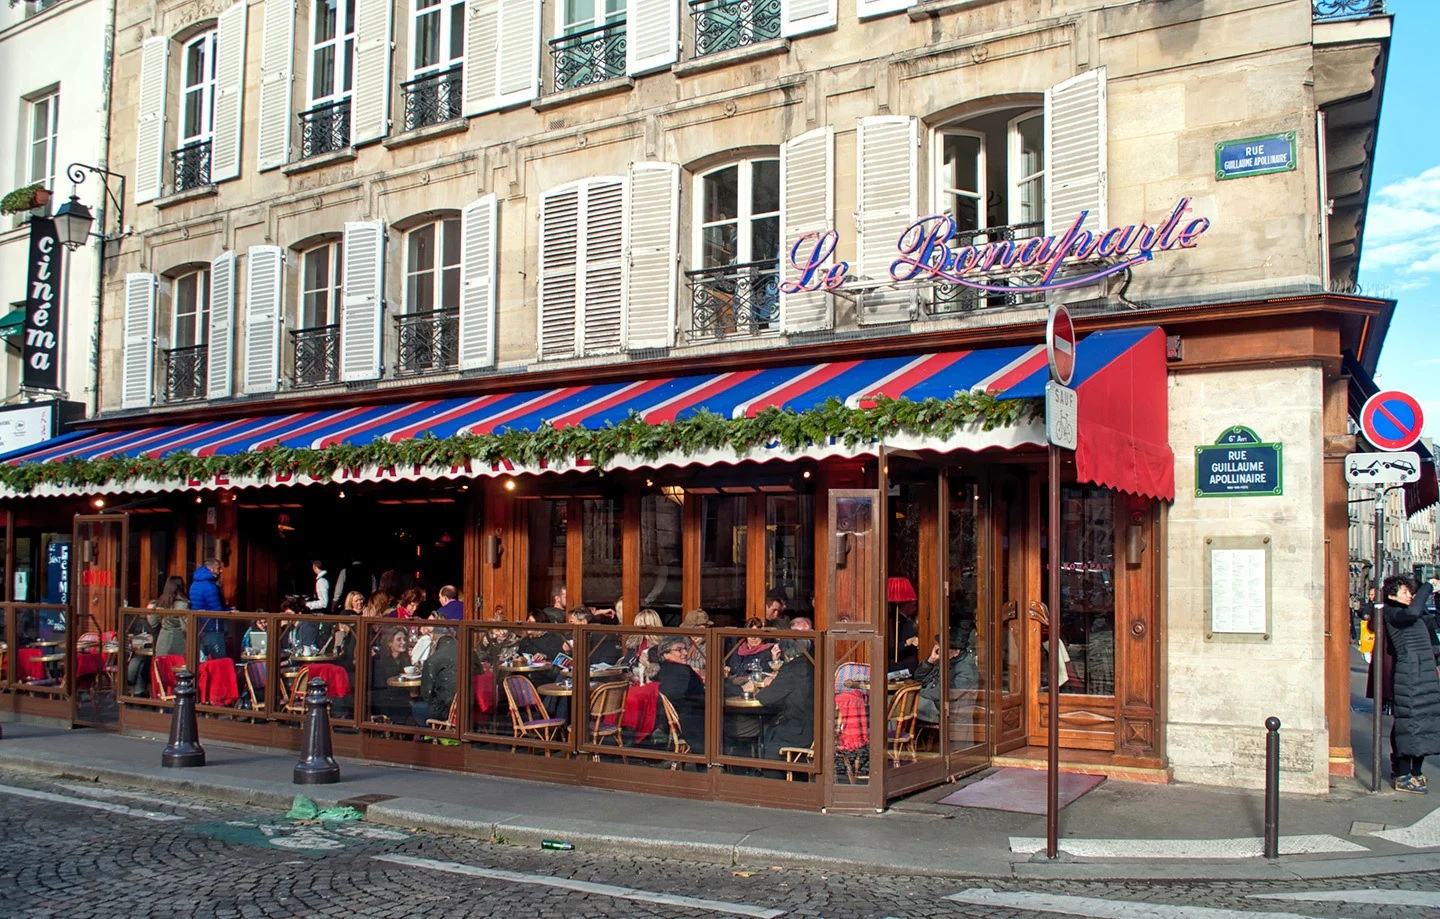 The streets of St Germain, Paris: A self-guided walking tour